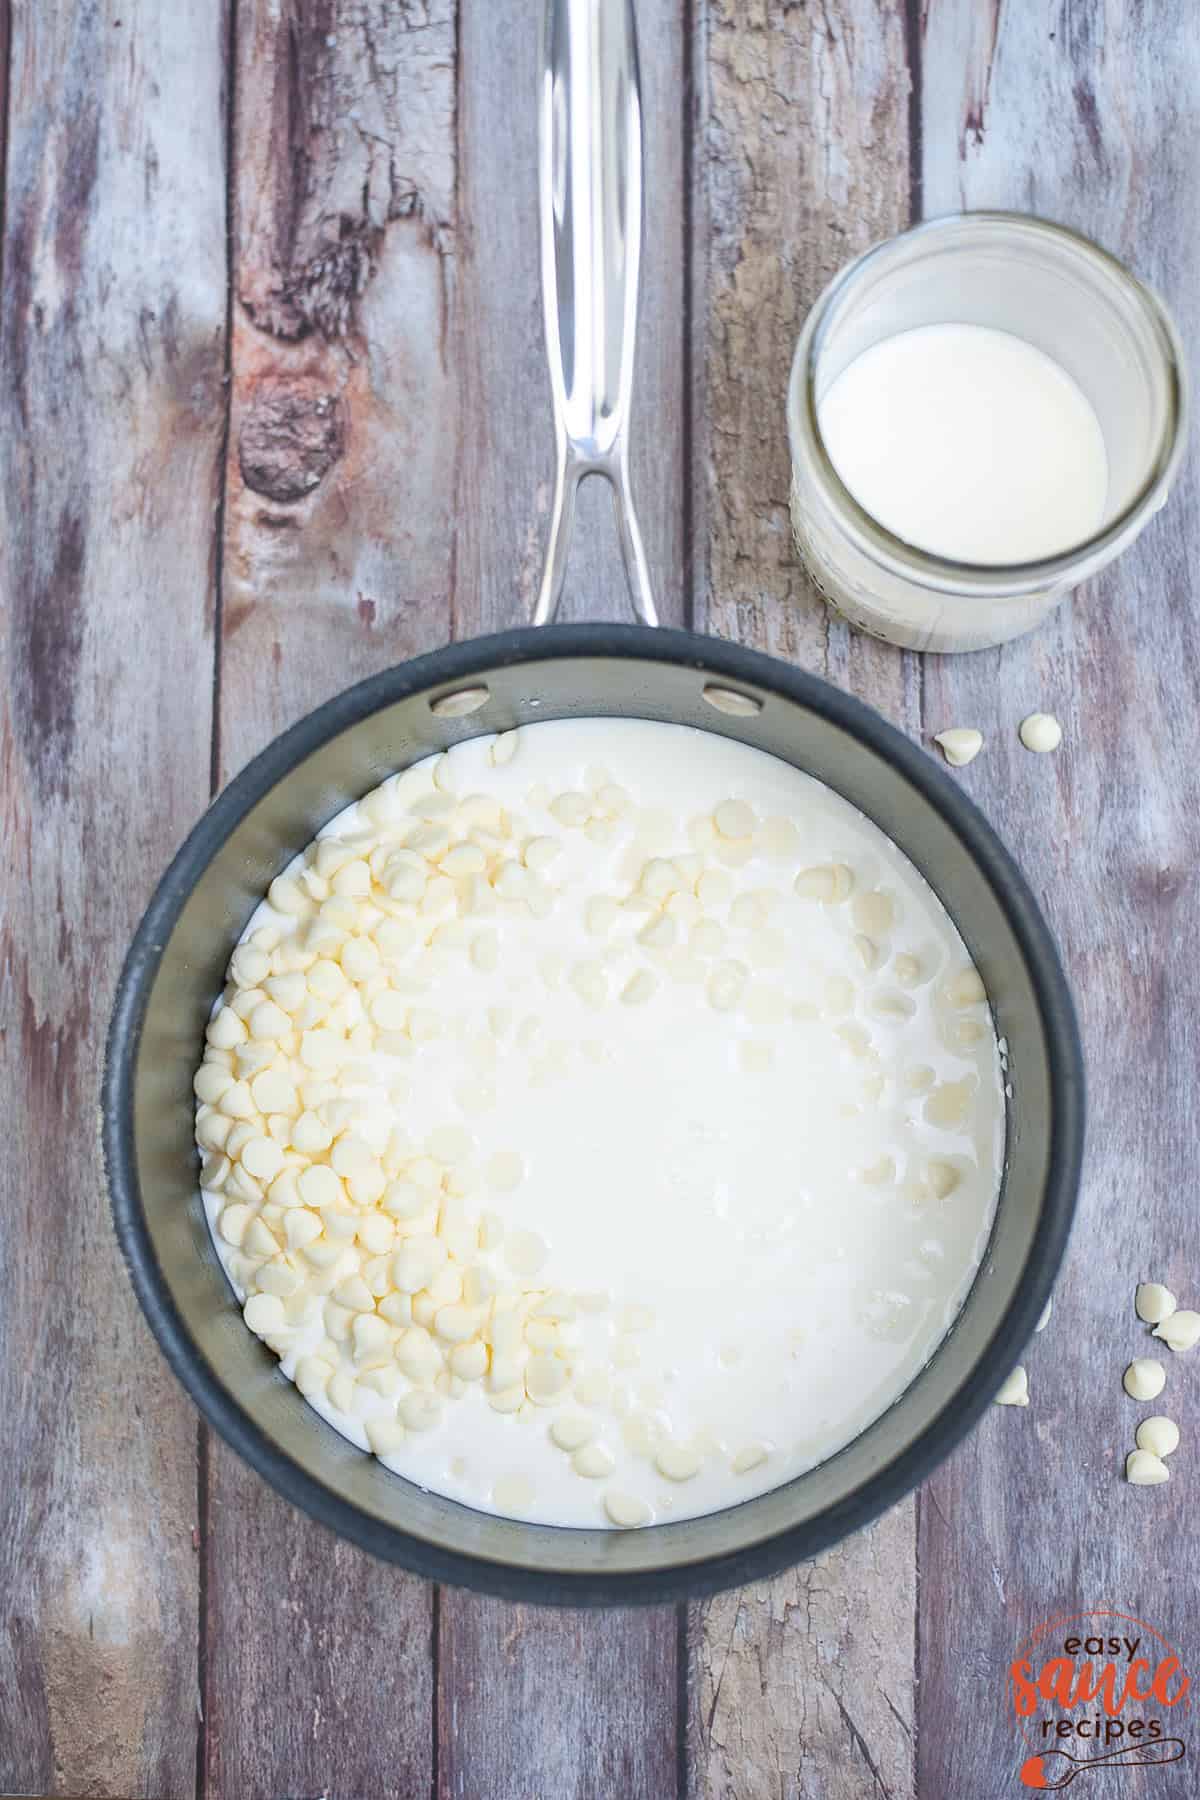 melting white chocolate chips to make syrup